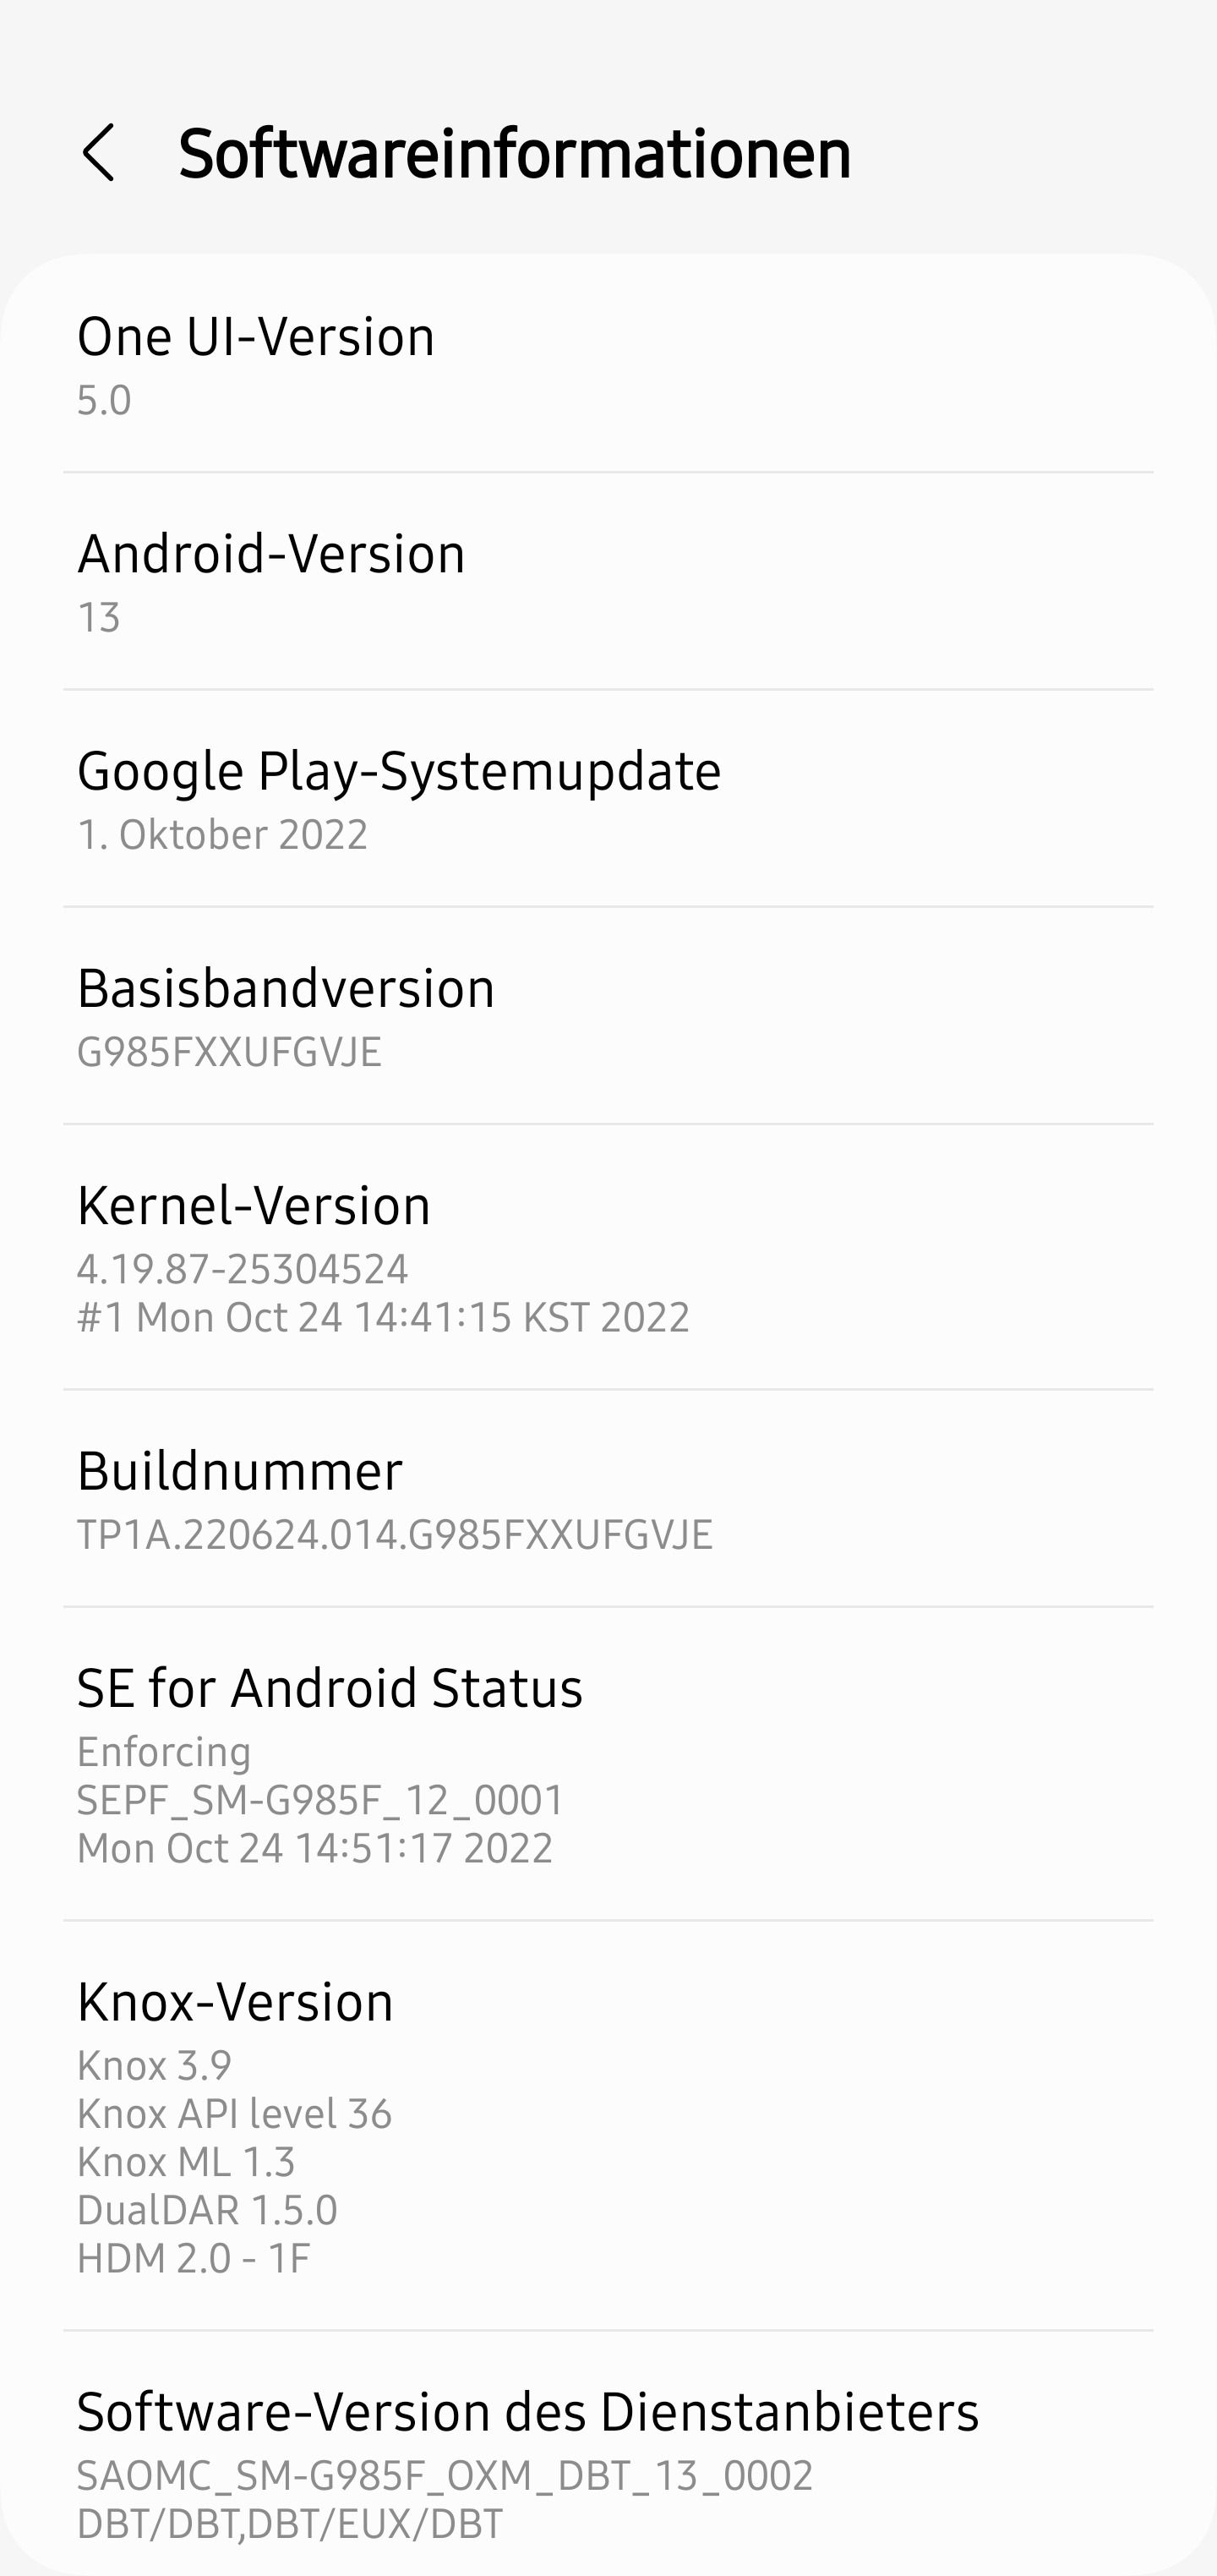 Screenshot of software info screen on Galaxy S20 series device showing One UI 5 update.